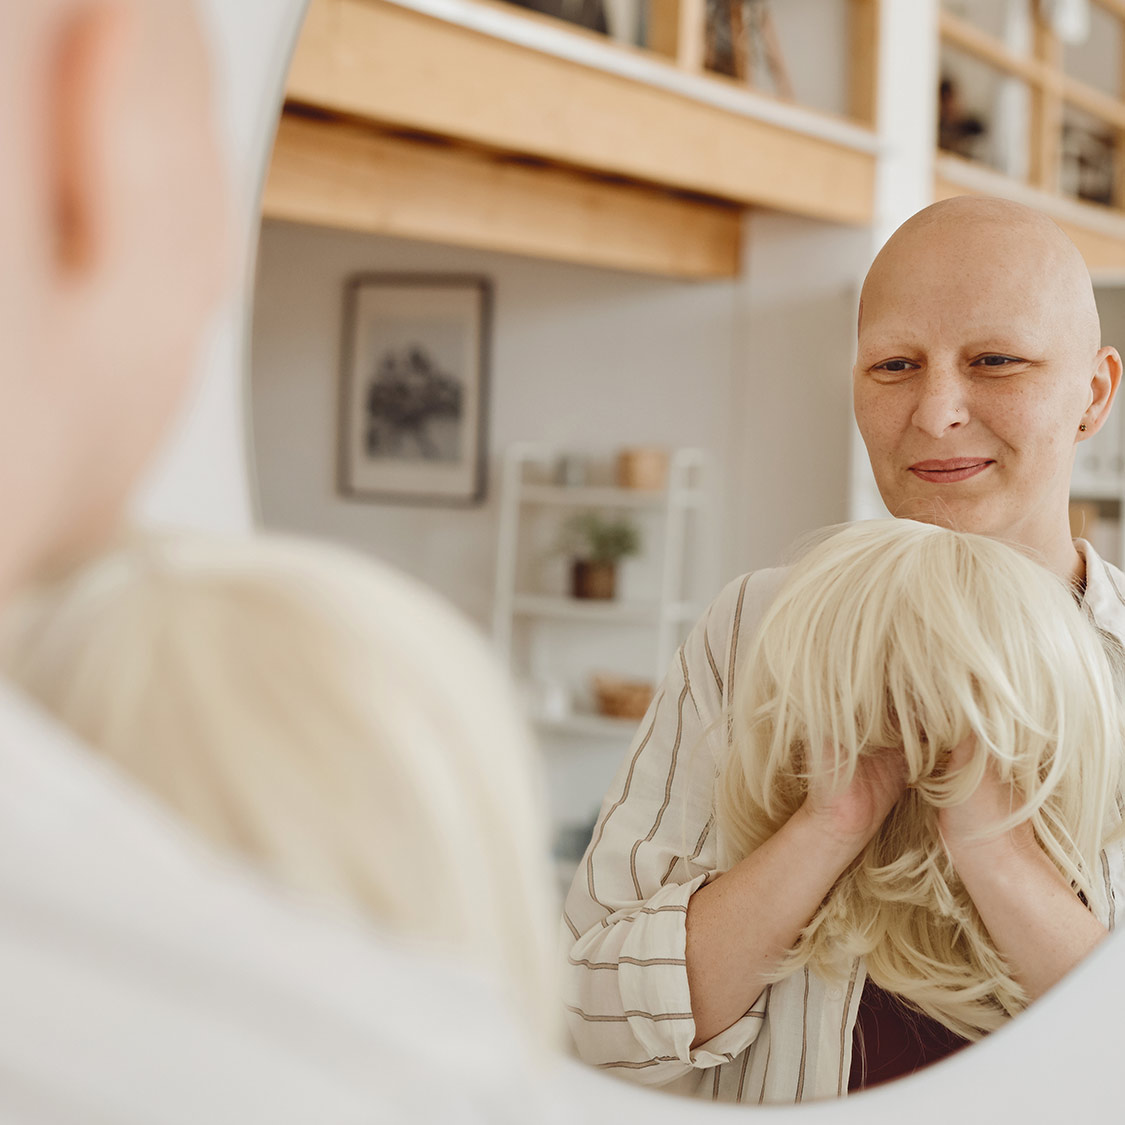 Female cancer patient with wig